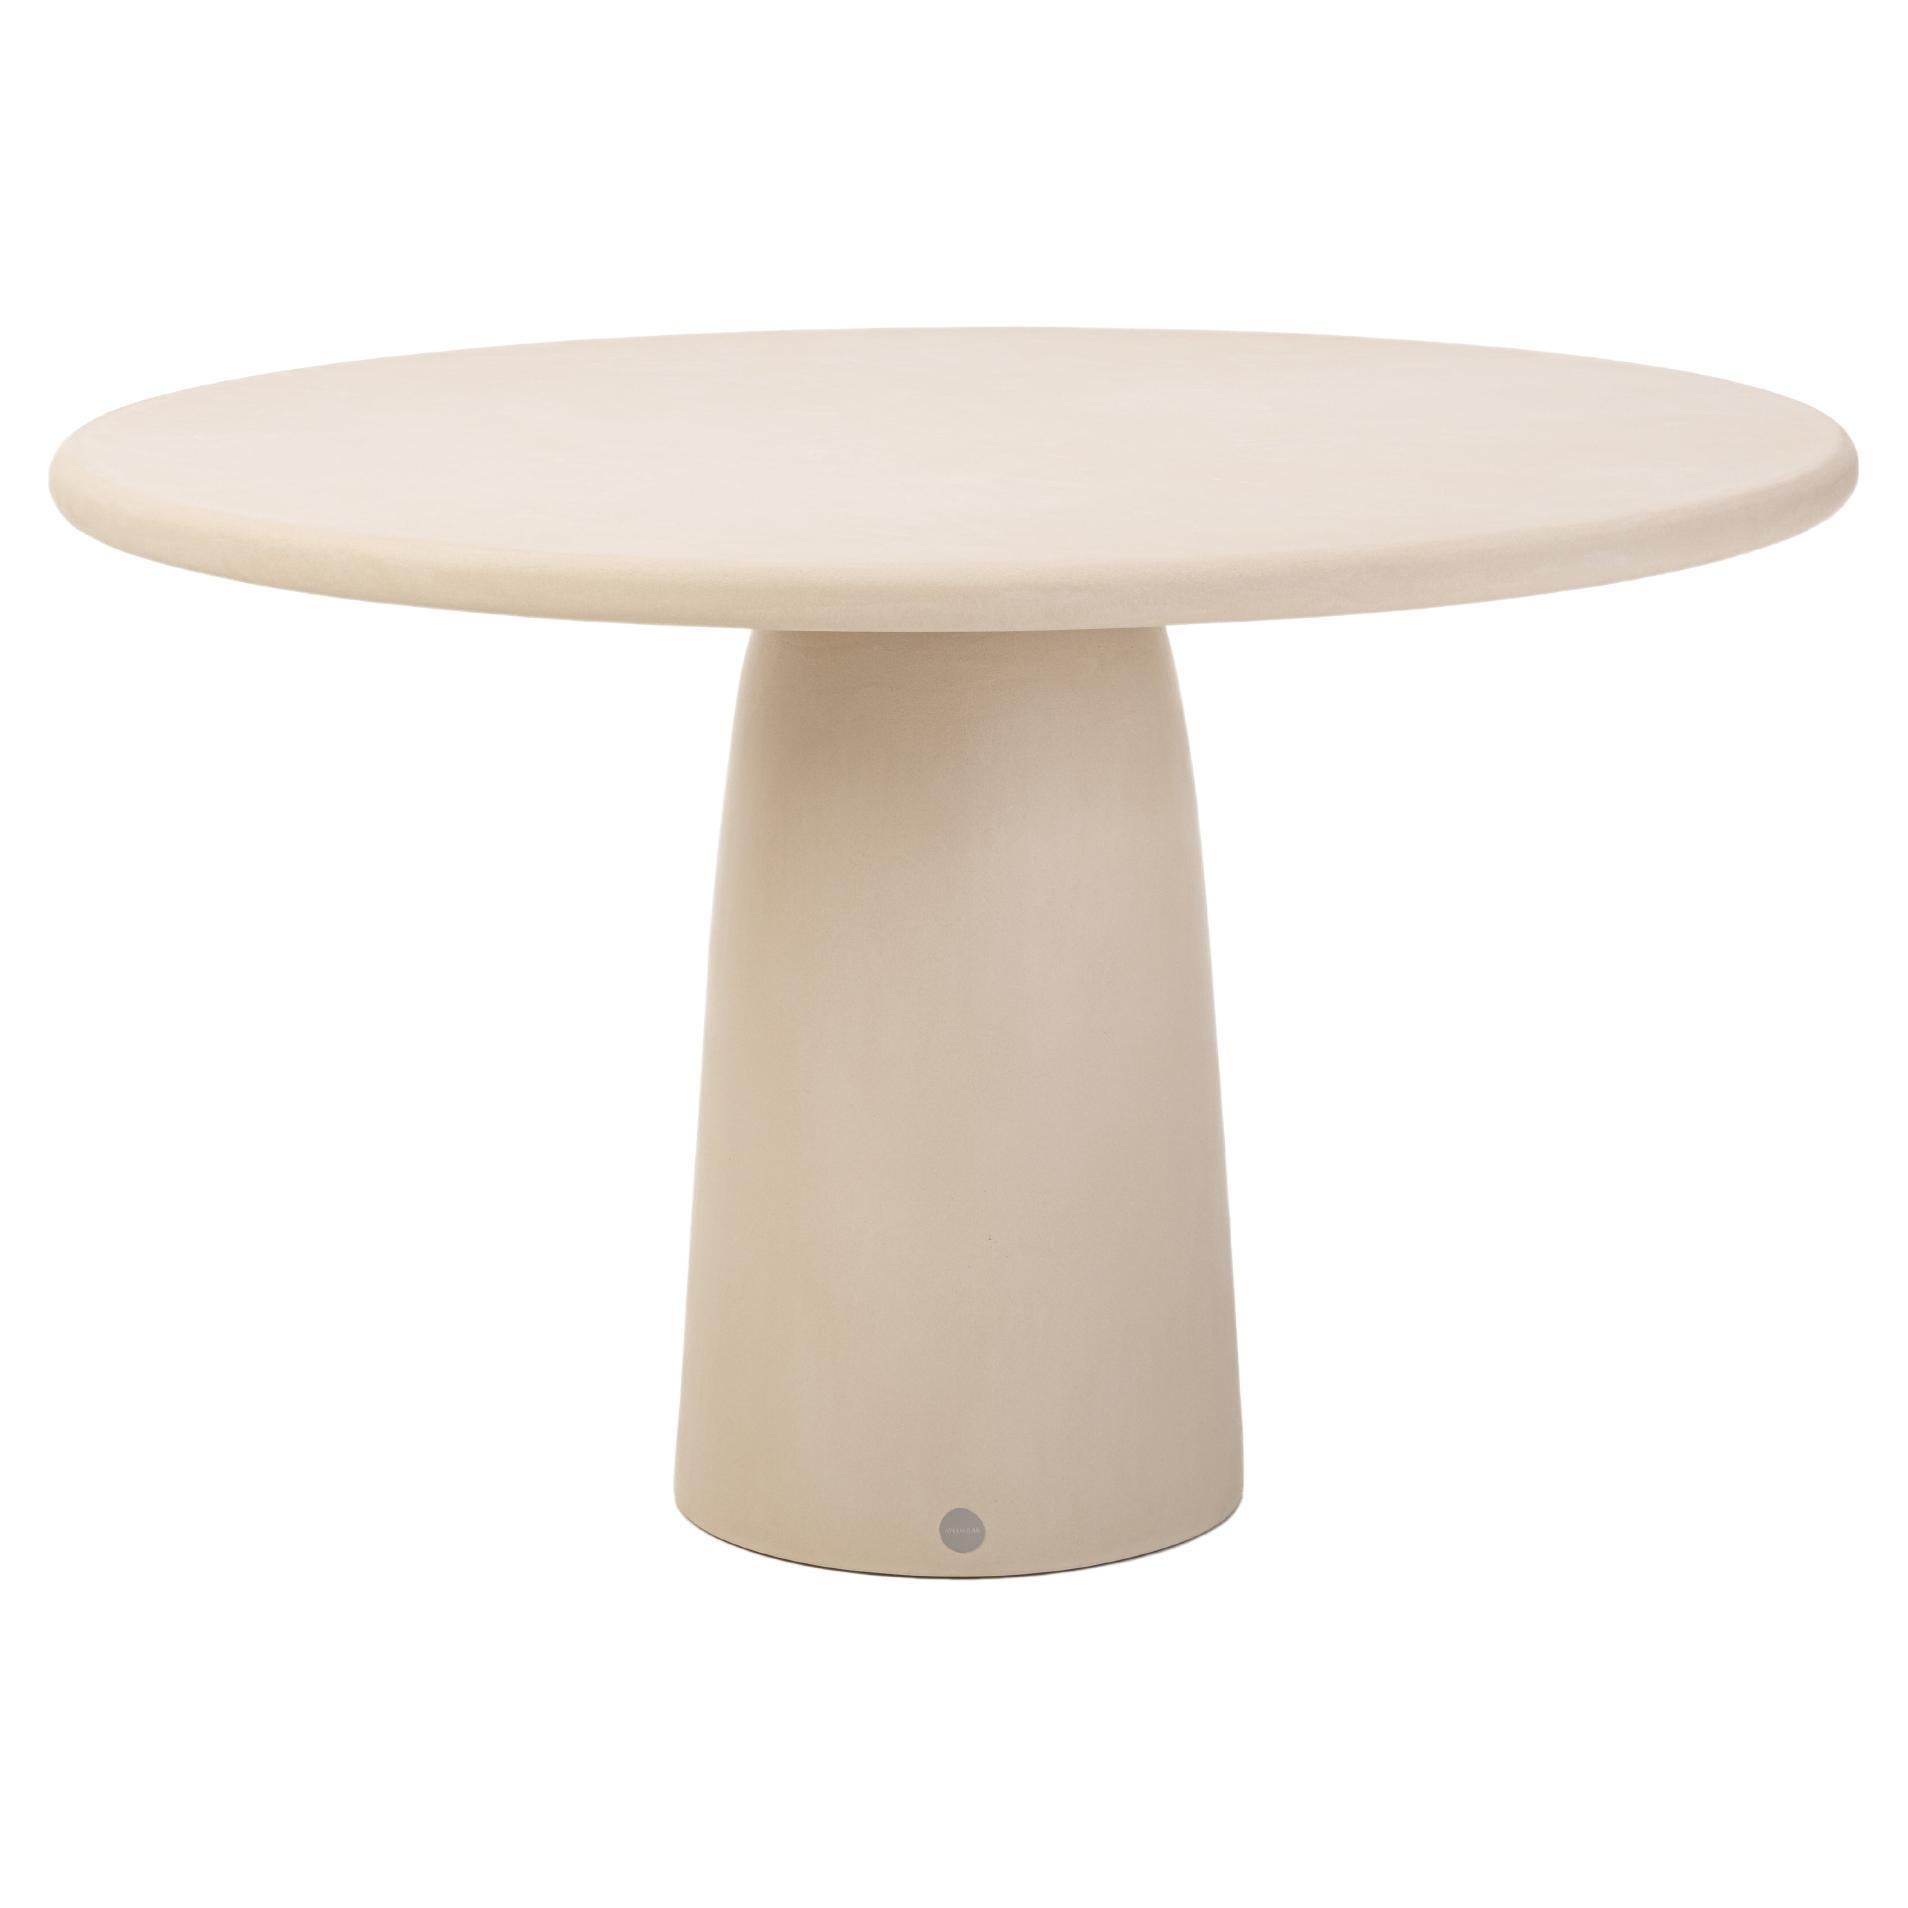 Contemporary Round Natural Plaster "Menhir" Table 120cm by Isabelle Beaumont For Sale